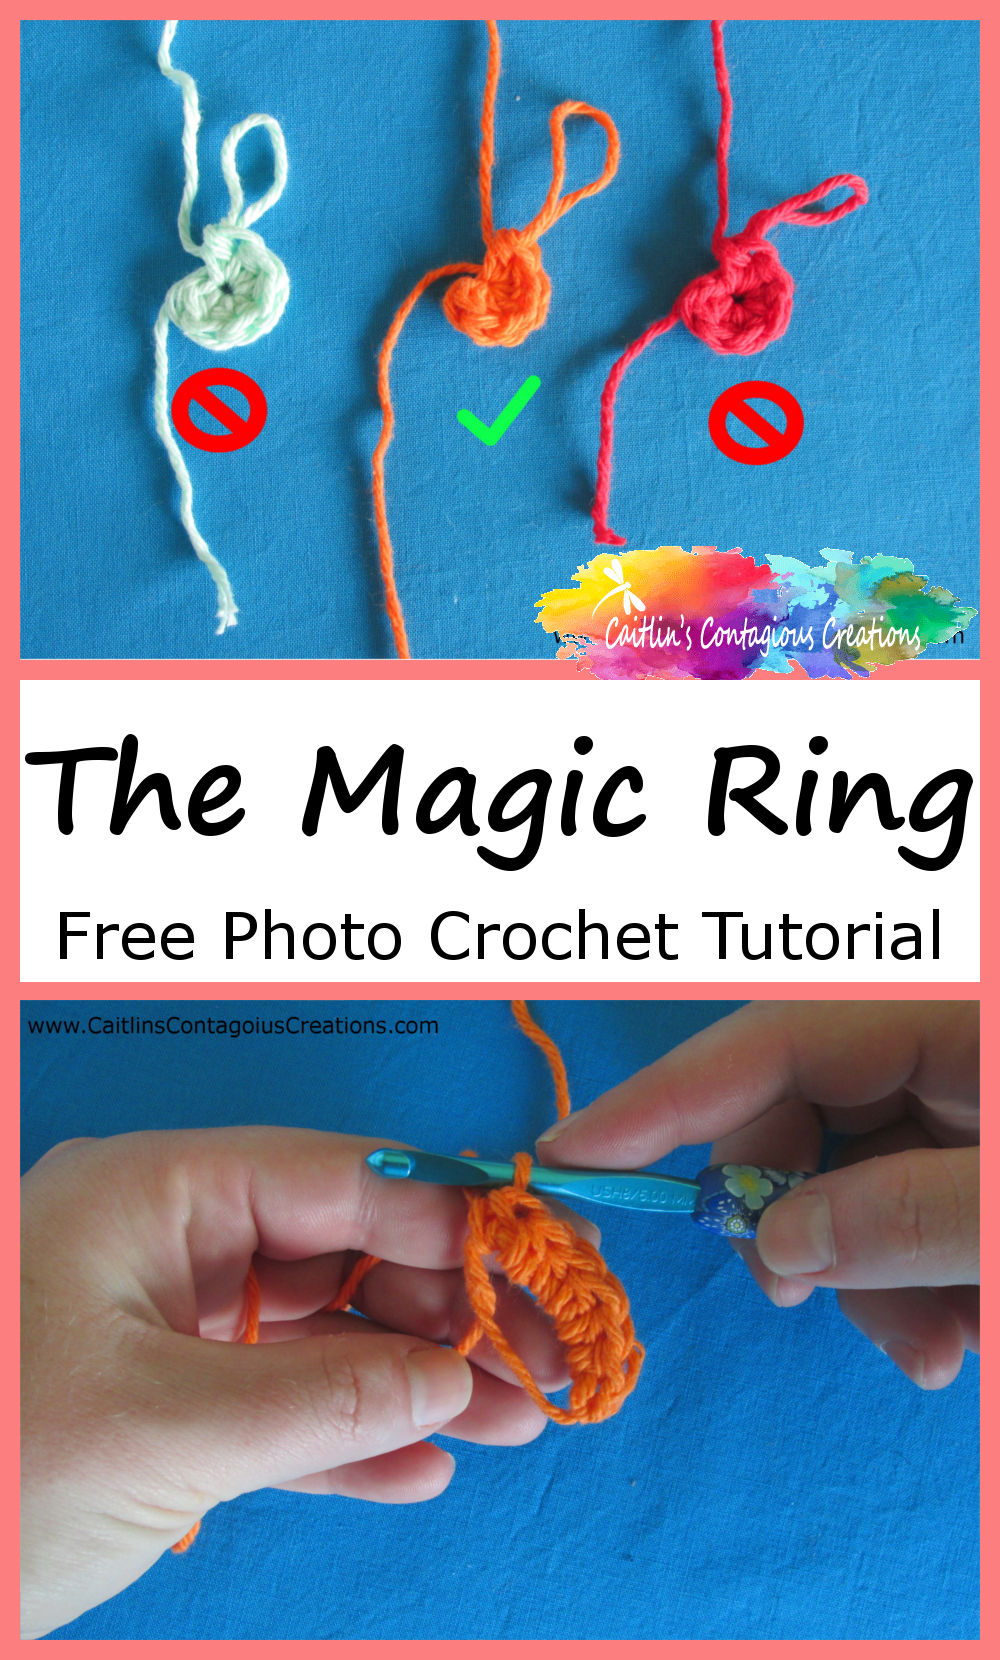 magic ring in use and step photo after final slip knot with text overlay